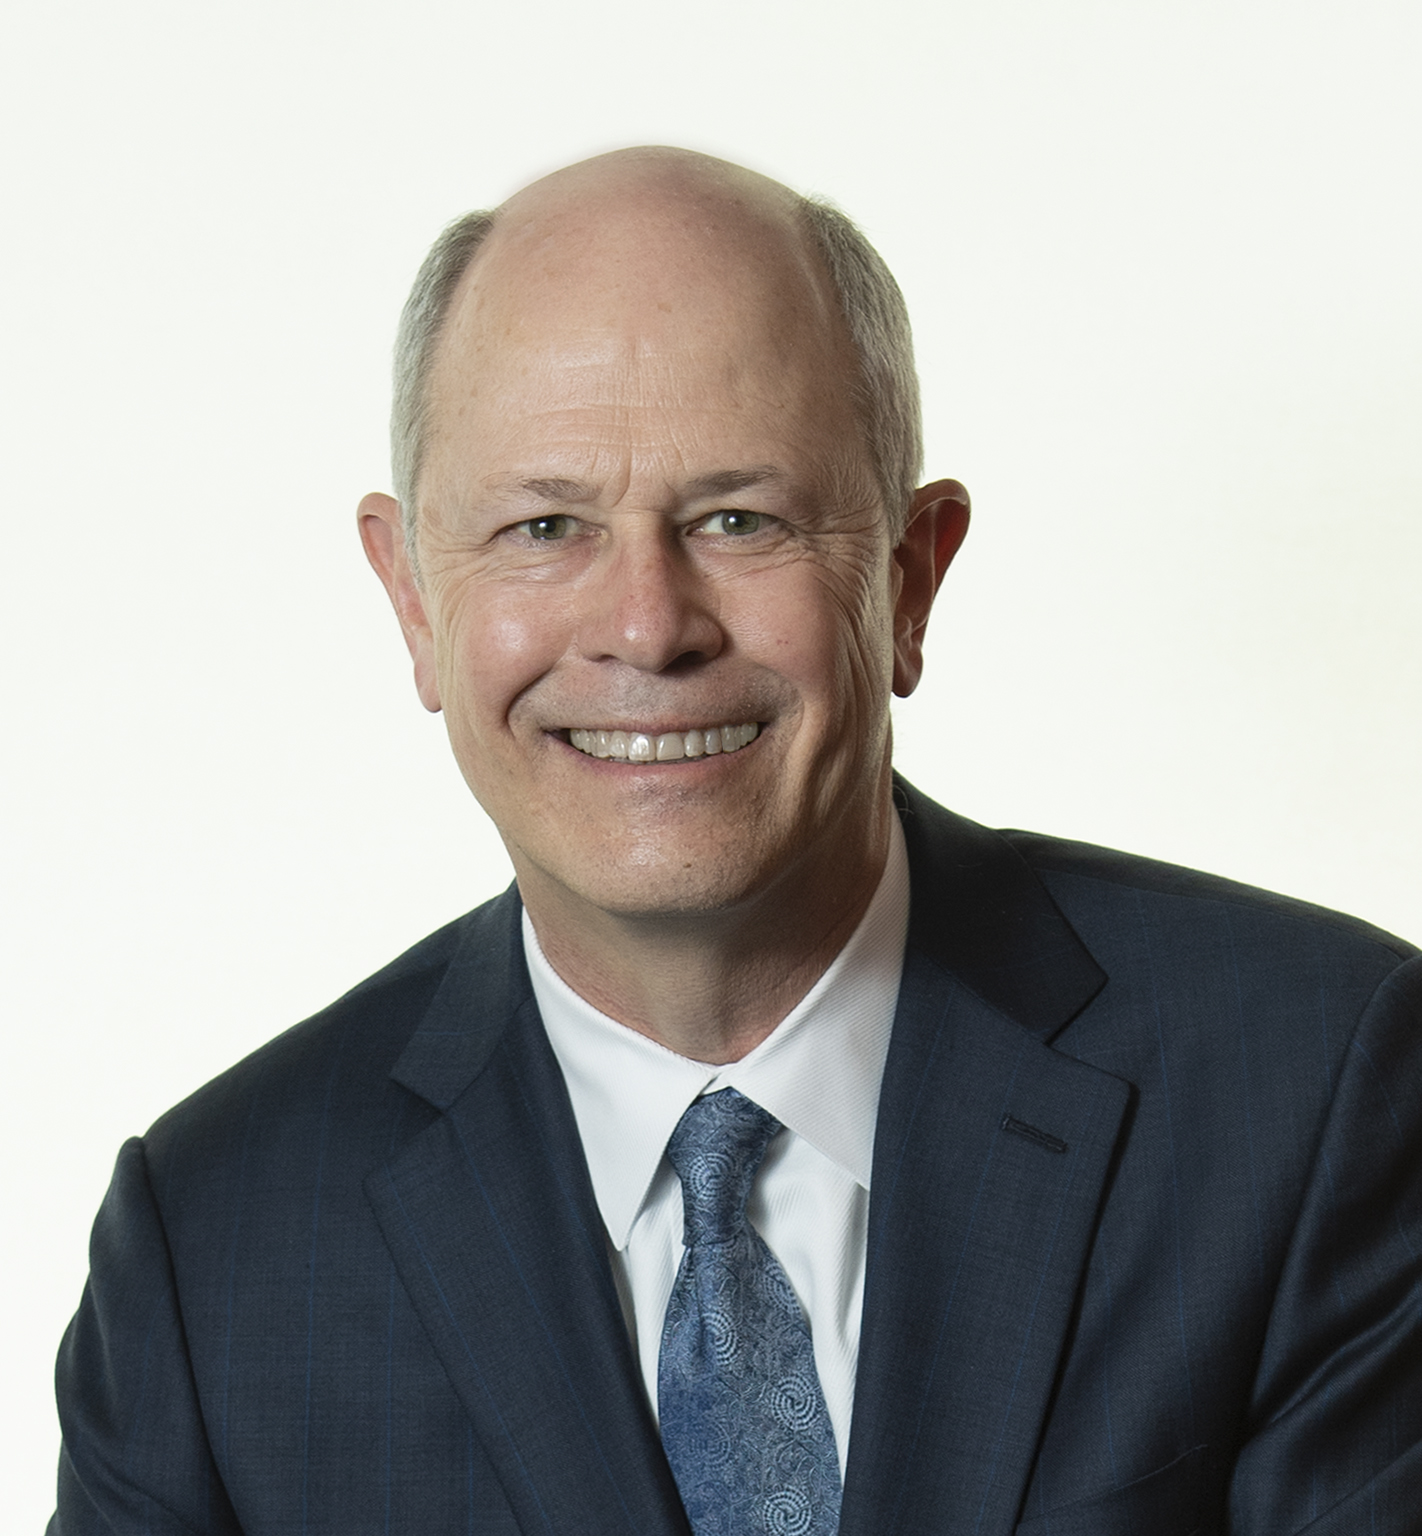 Kevin M. Phillips, ManTech Chairman, CEO and President